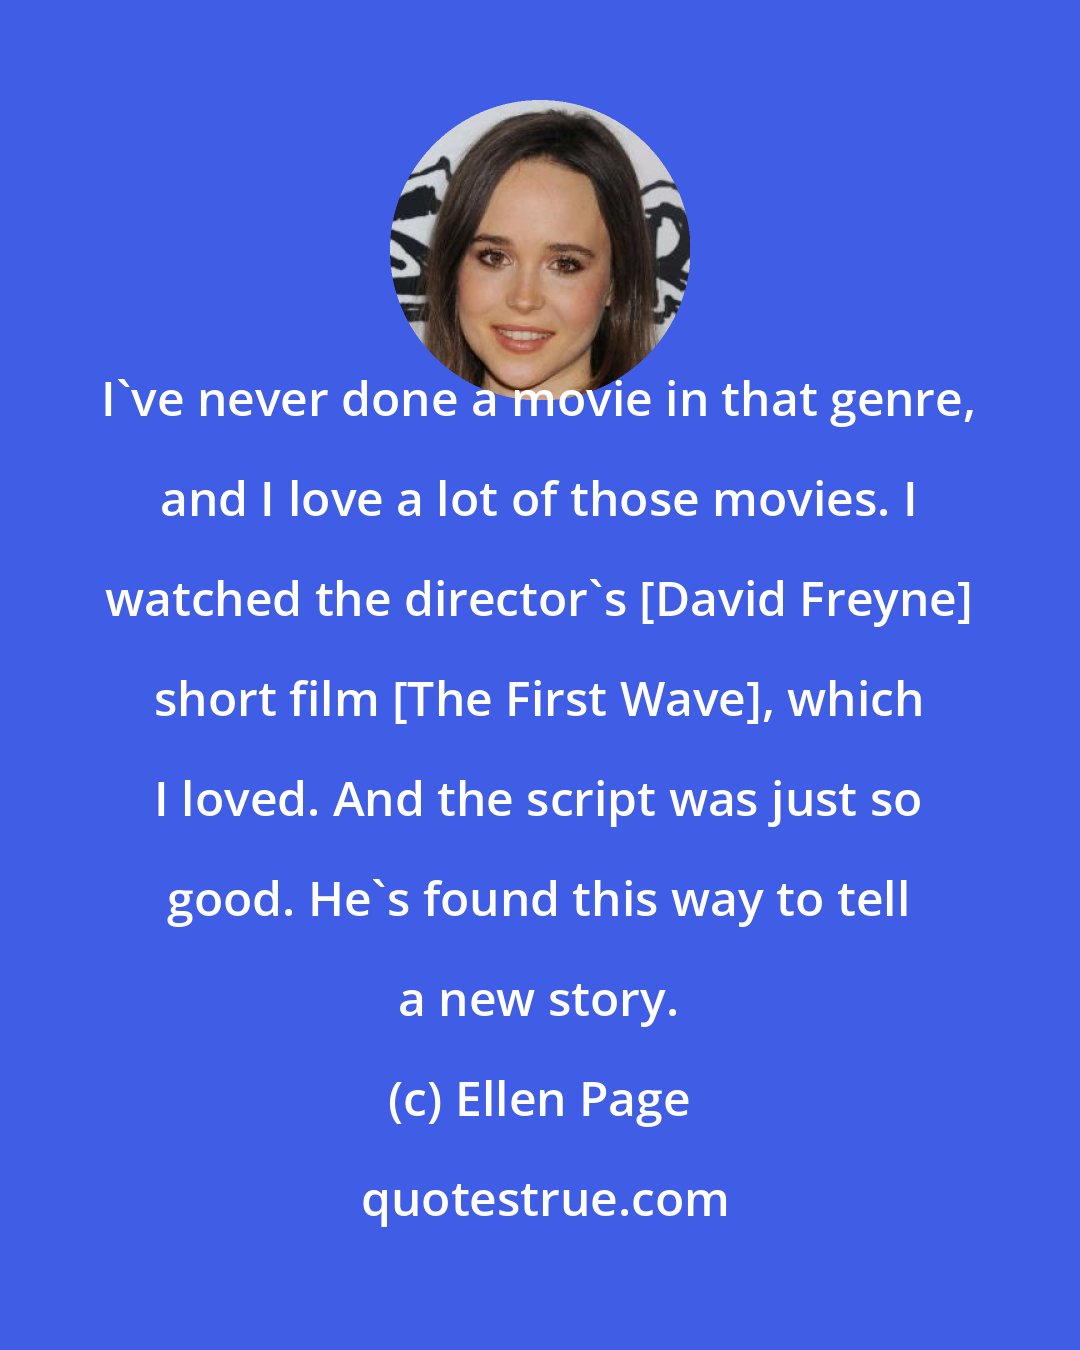 Ellen Page: I've never done a movie in that genre, and I love a lot of those movies. I watched the director's [David Freyne] short film [The First Wave], which I loved. And the script was just so good. He's found this way to tell a new story.